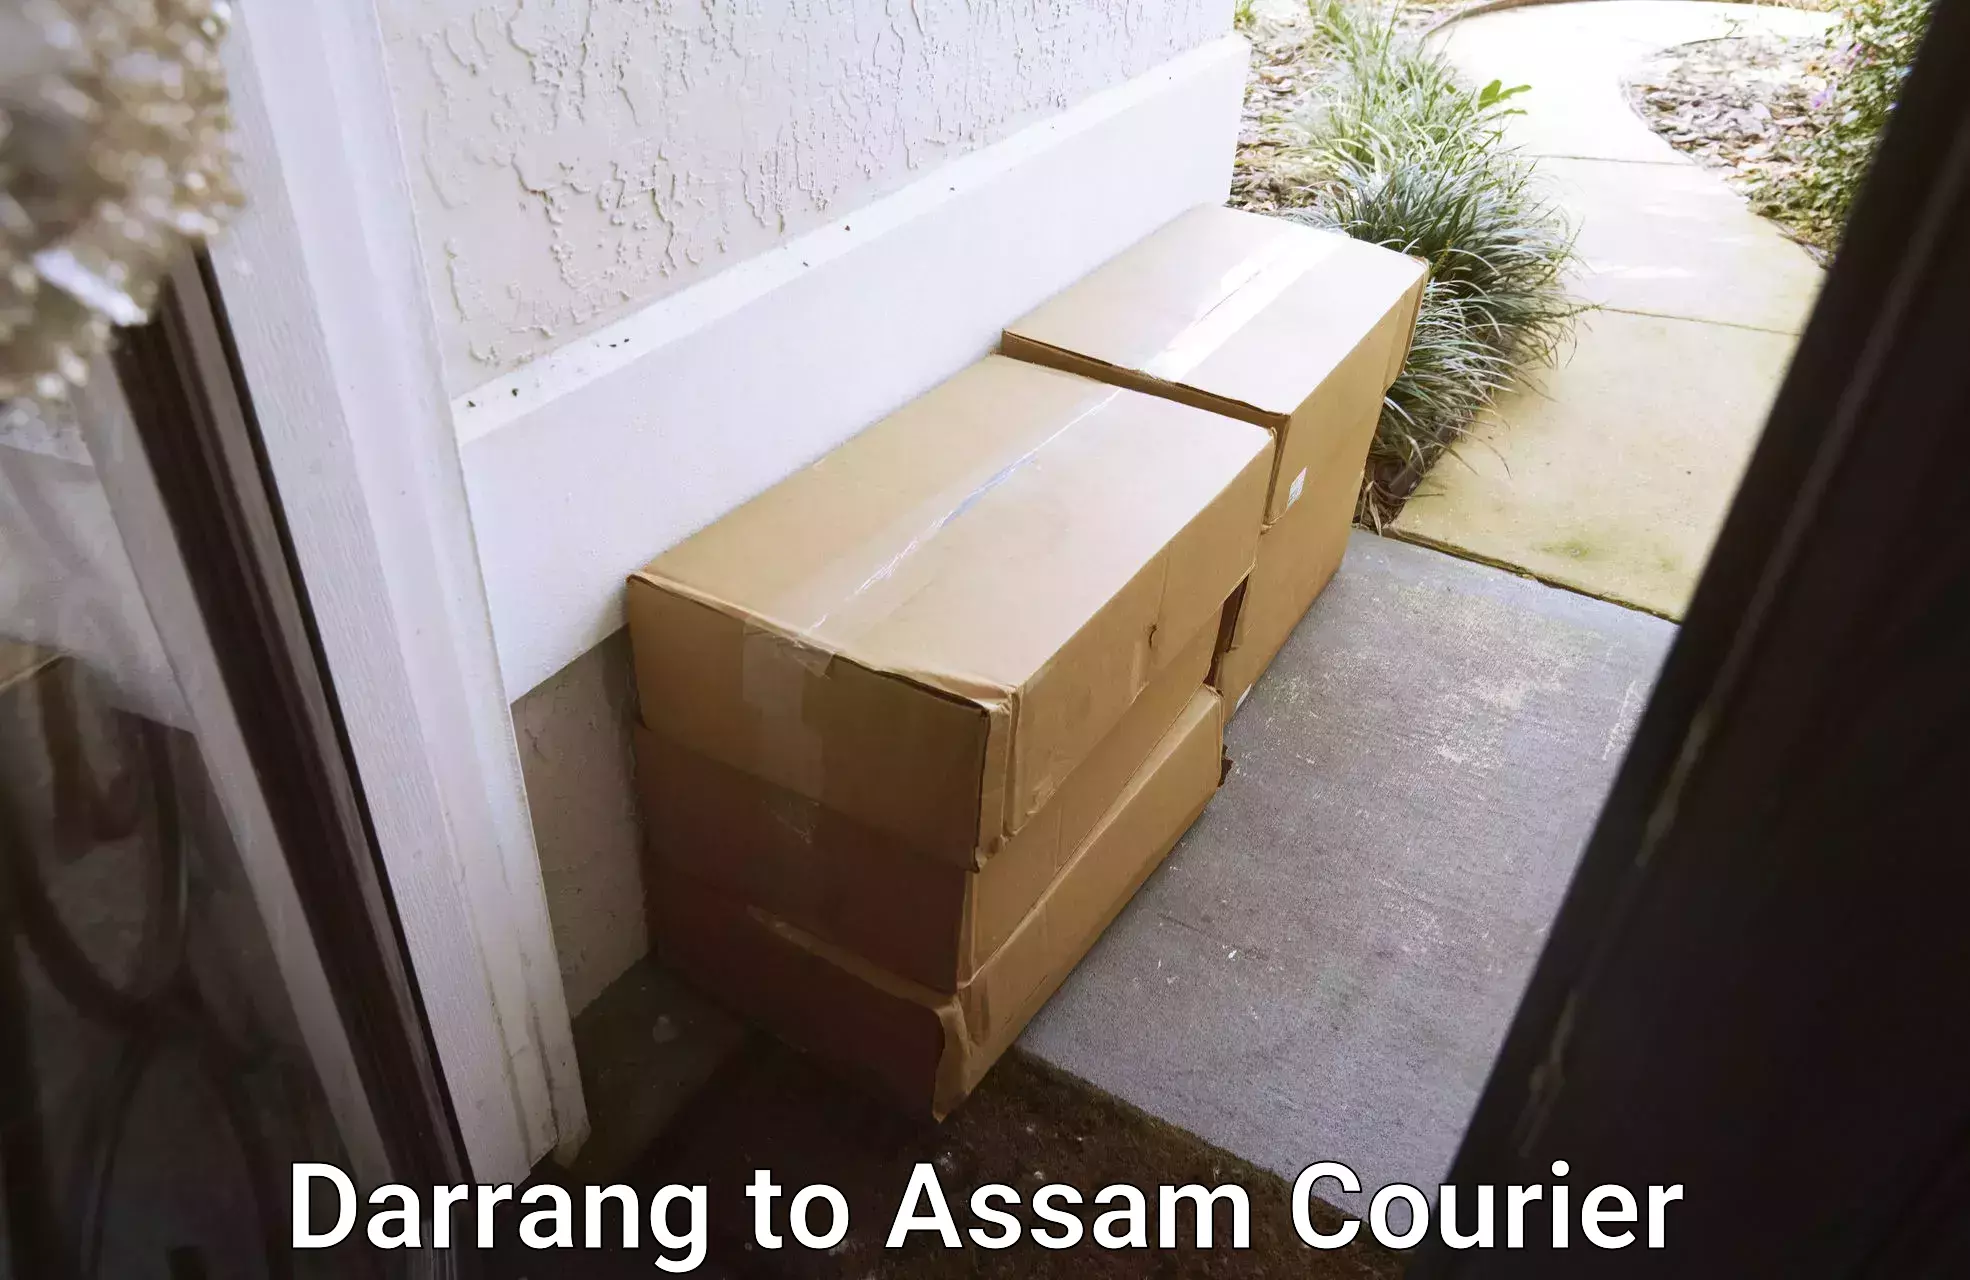 Reliable courier services Darrang to Dibrugarh